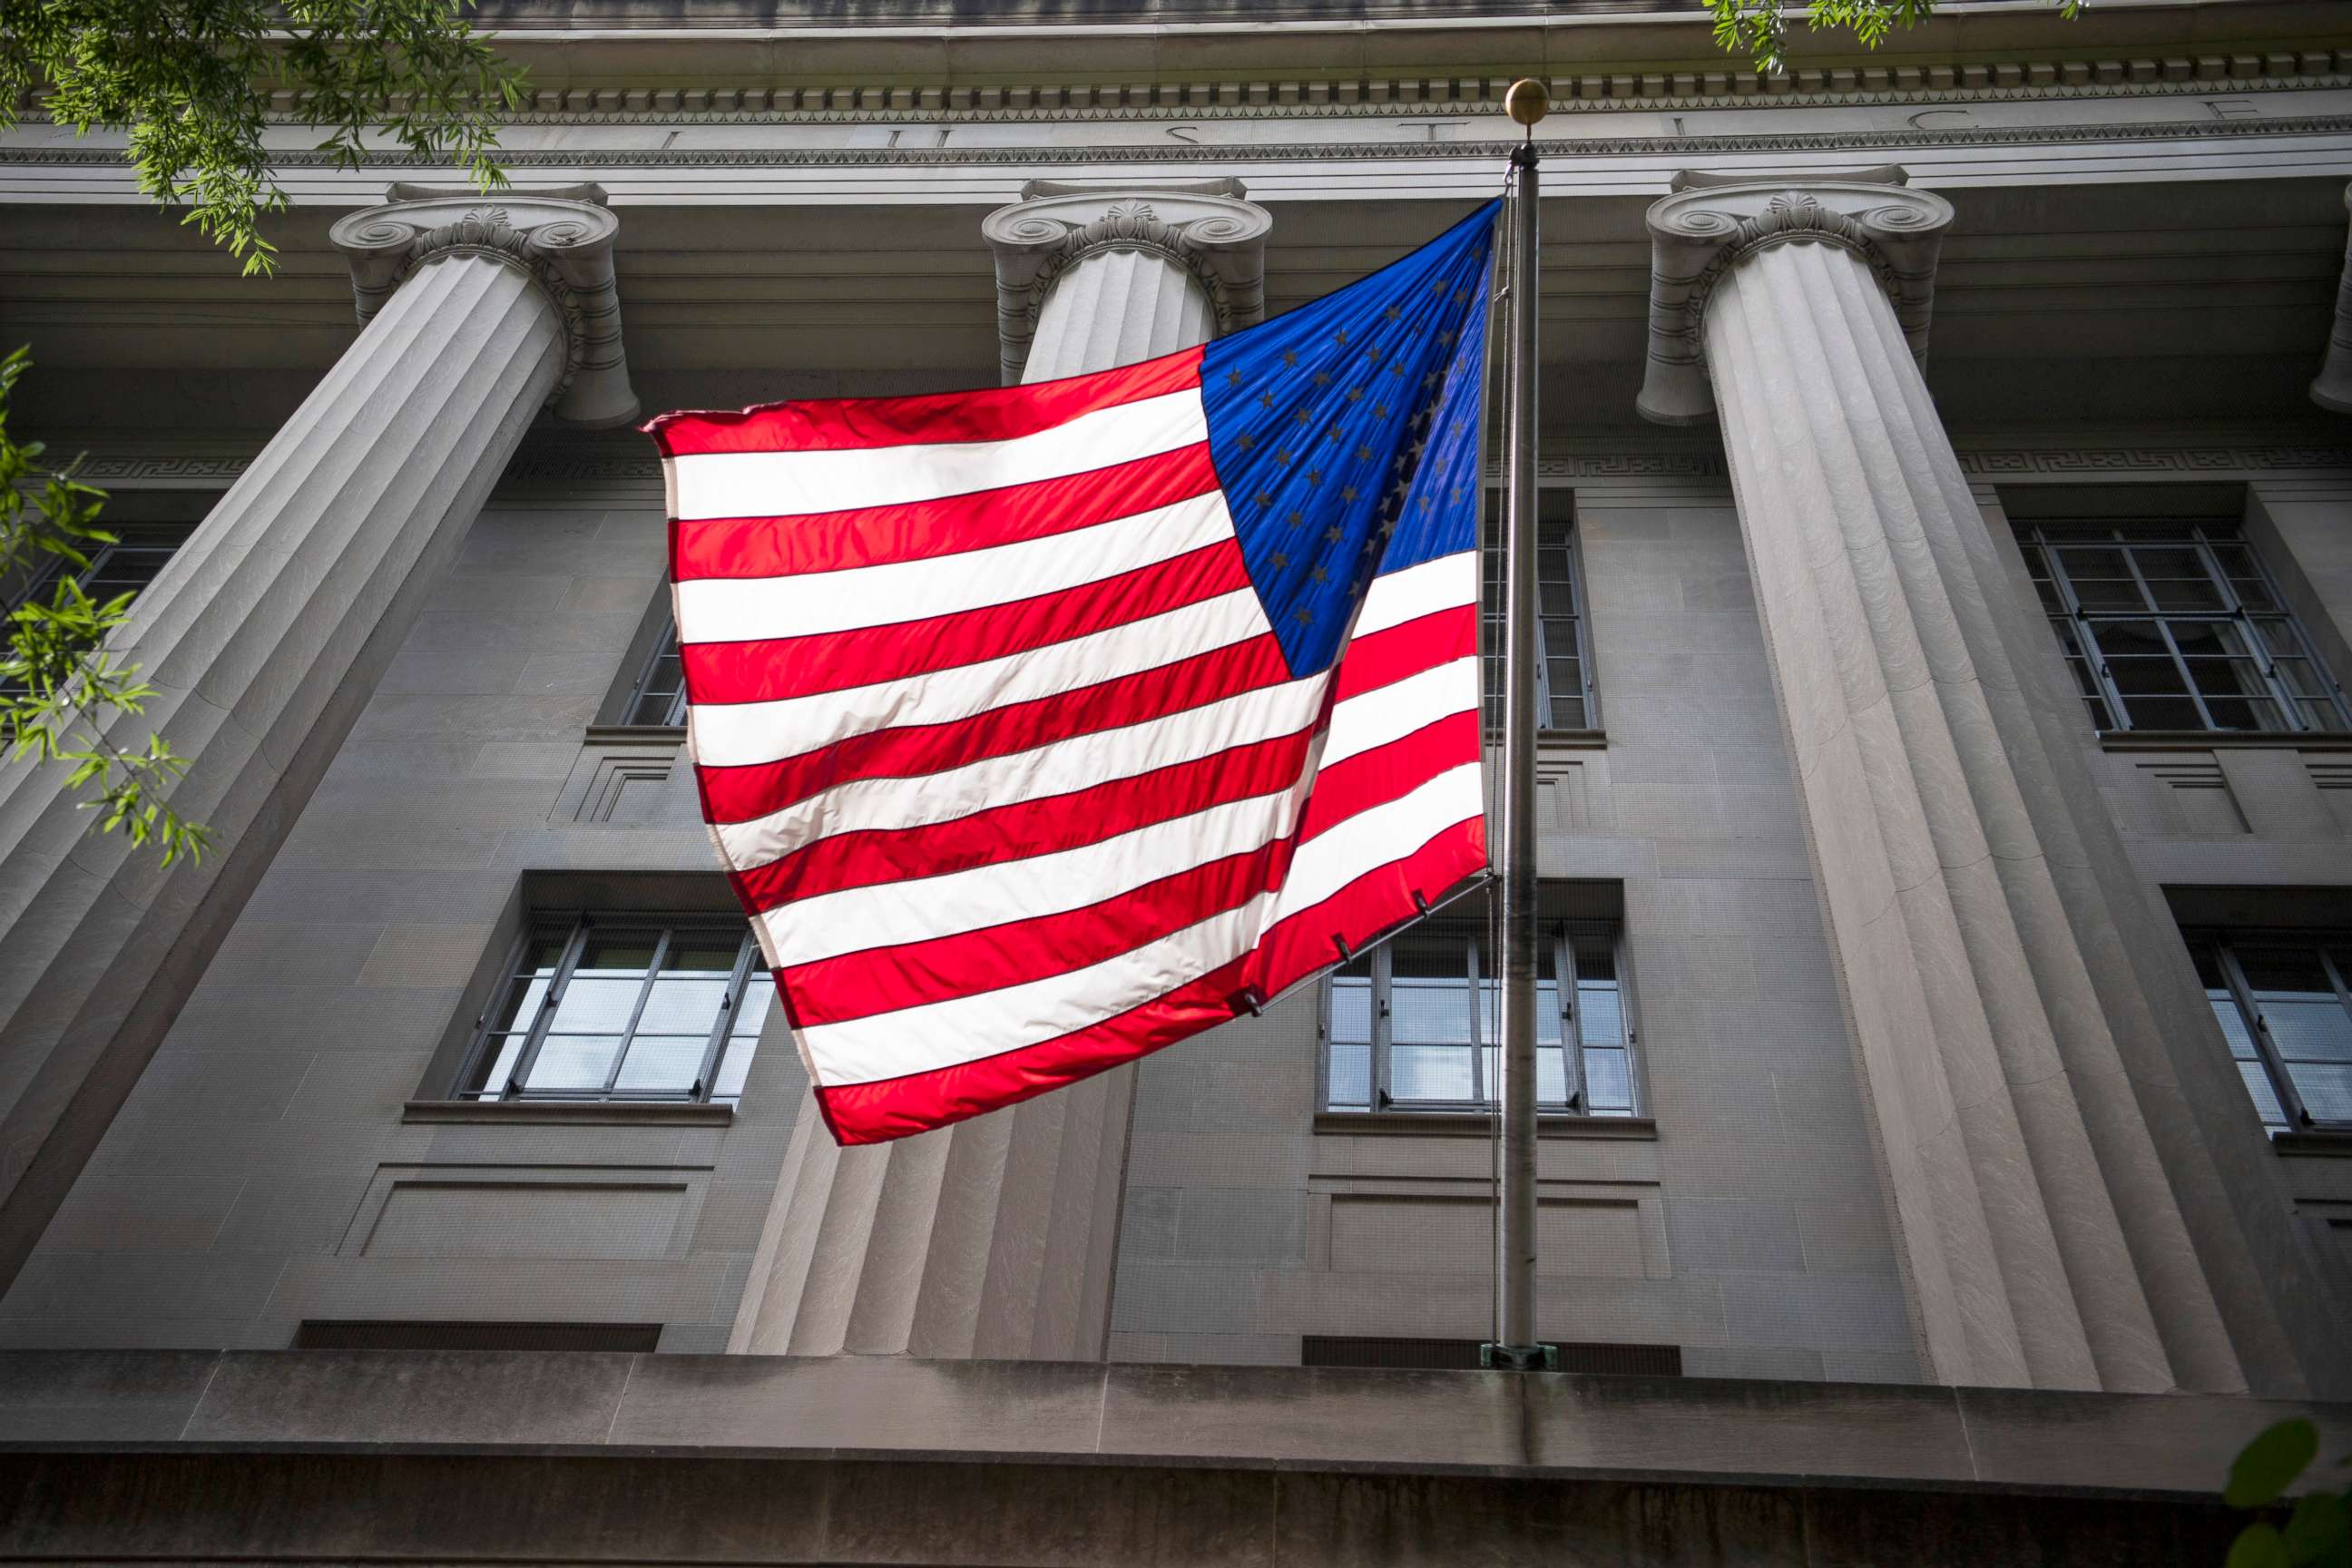 PHOTO: An American flag is displayed on the Pennsylvania Avenue side of the Department of Justice, June 3, 2020.